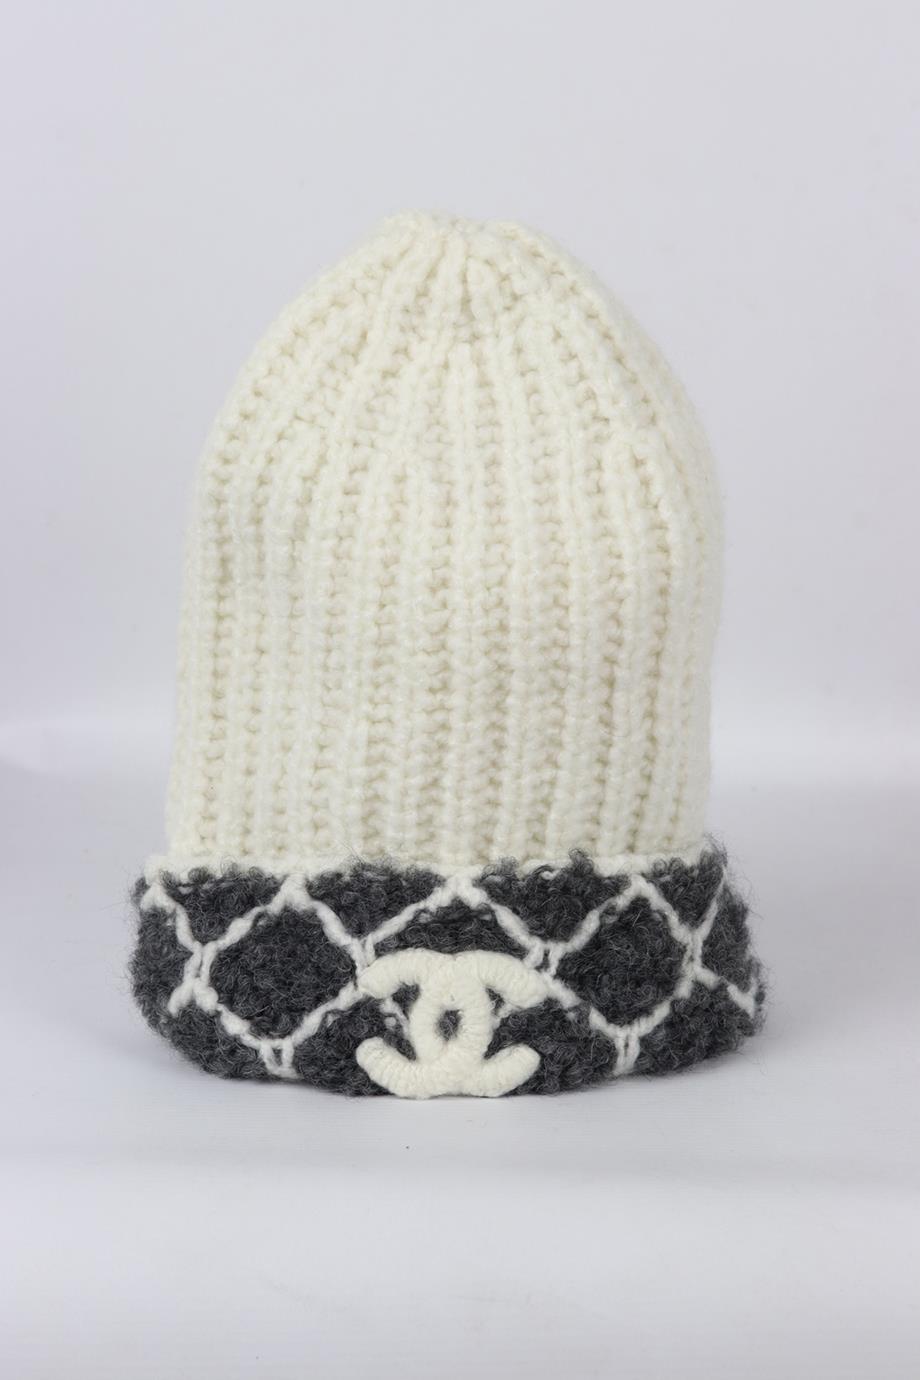 Chanel 2021 logo detailed ribbed cashmere blend beanie. White and grey. 66% Cashmere, 20% alpaca, 8% wool, 3% silk, 3% polyamide. Does not come with dustbag or box. Size: One Size. Height: 11 in. Circumference: 21 in. Very good condition - Worn